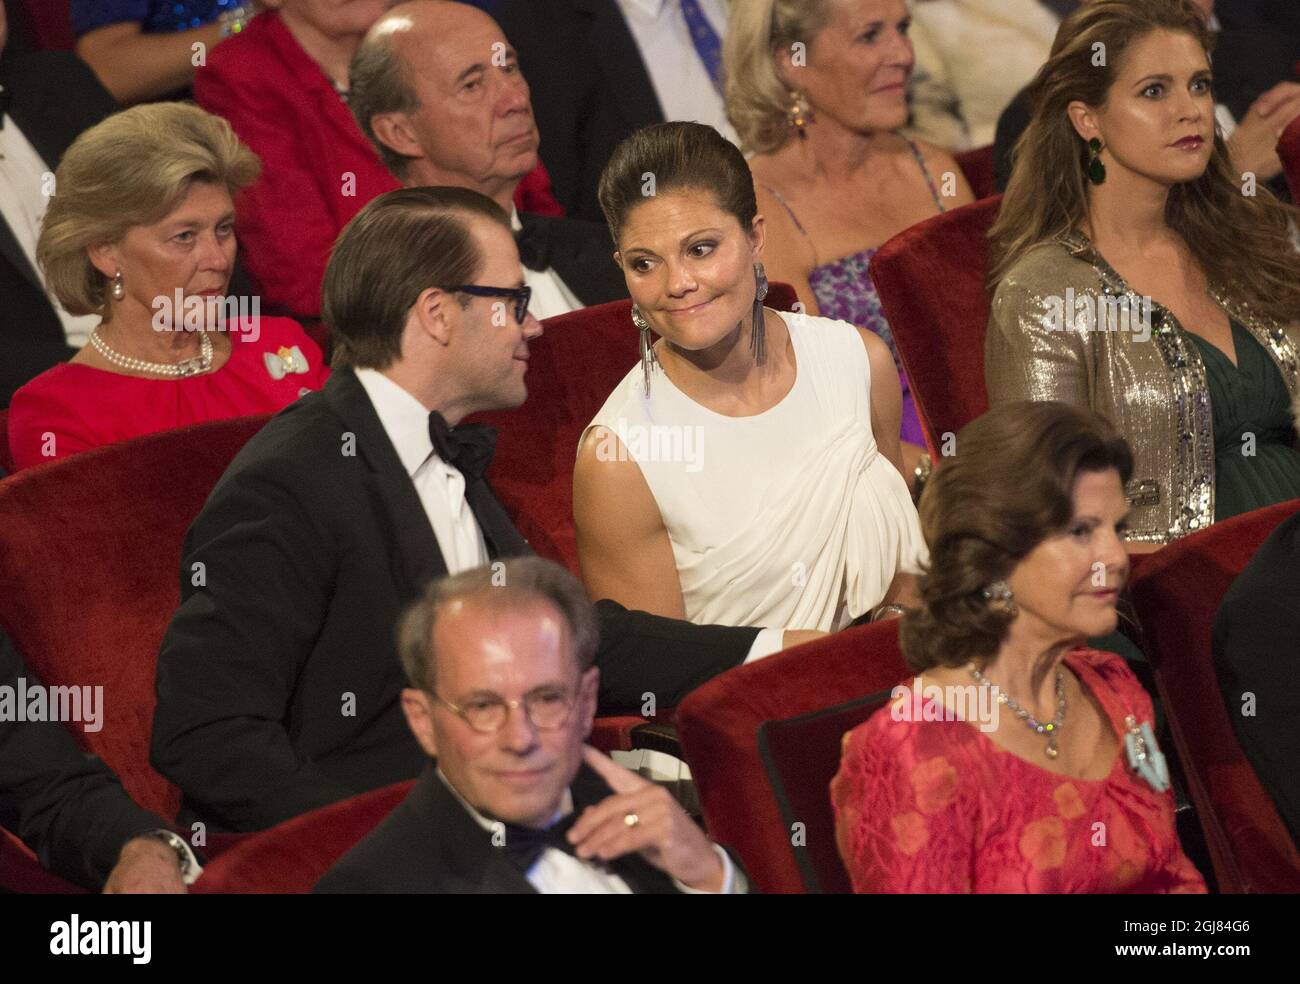 STOCKHOLM 20130914 Prince Daniel, Crown Princess Victoria, Princess Madeleine and in front of them Per Westerberg, Speaker of the Parliament and Queen Silvia at the Swedish Riksdag's jubilee concert in connection with The King's 40th jubilee, held at the Concert Hall in Stockholm September 14, 2013. Photo: Fredrik Sandberg / SCANPIX / Kod 10080  Stock Photo